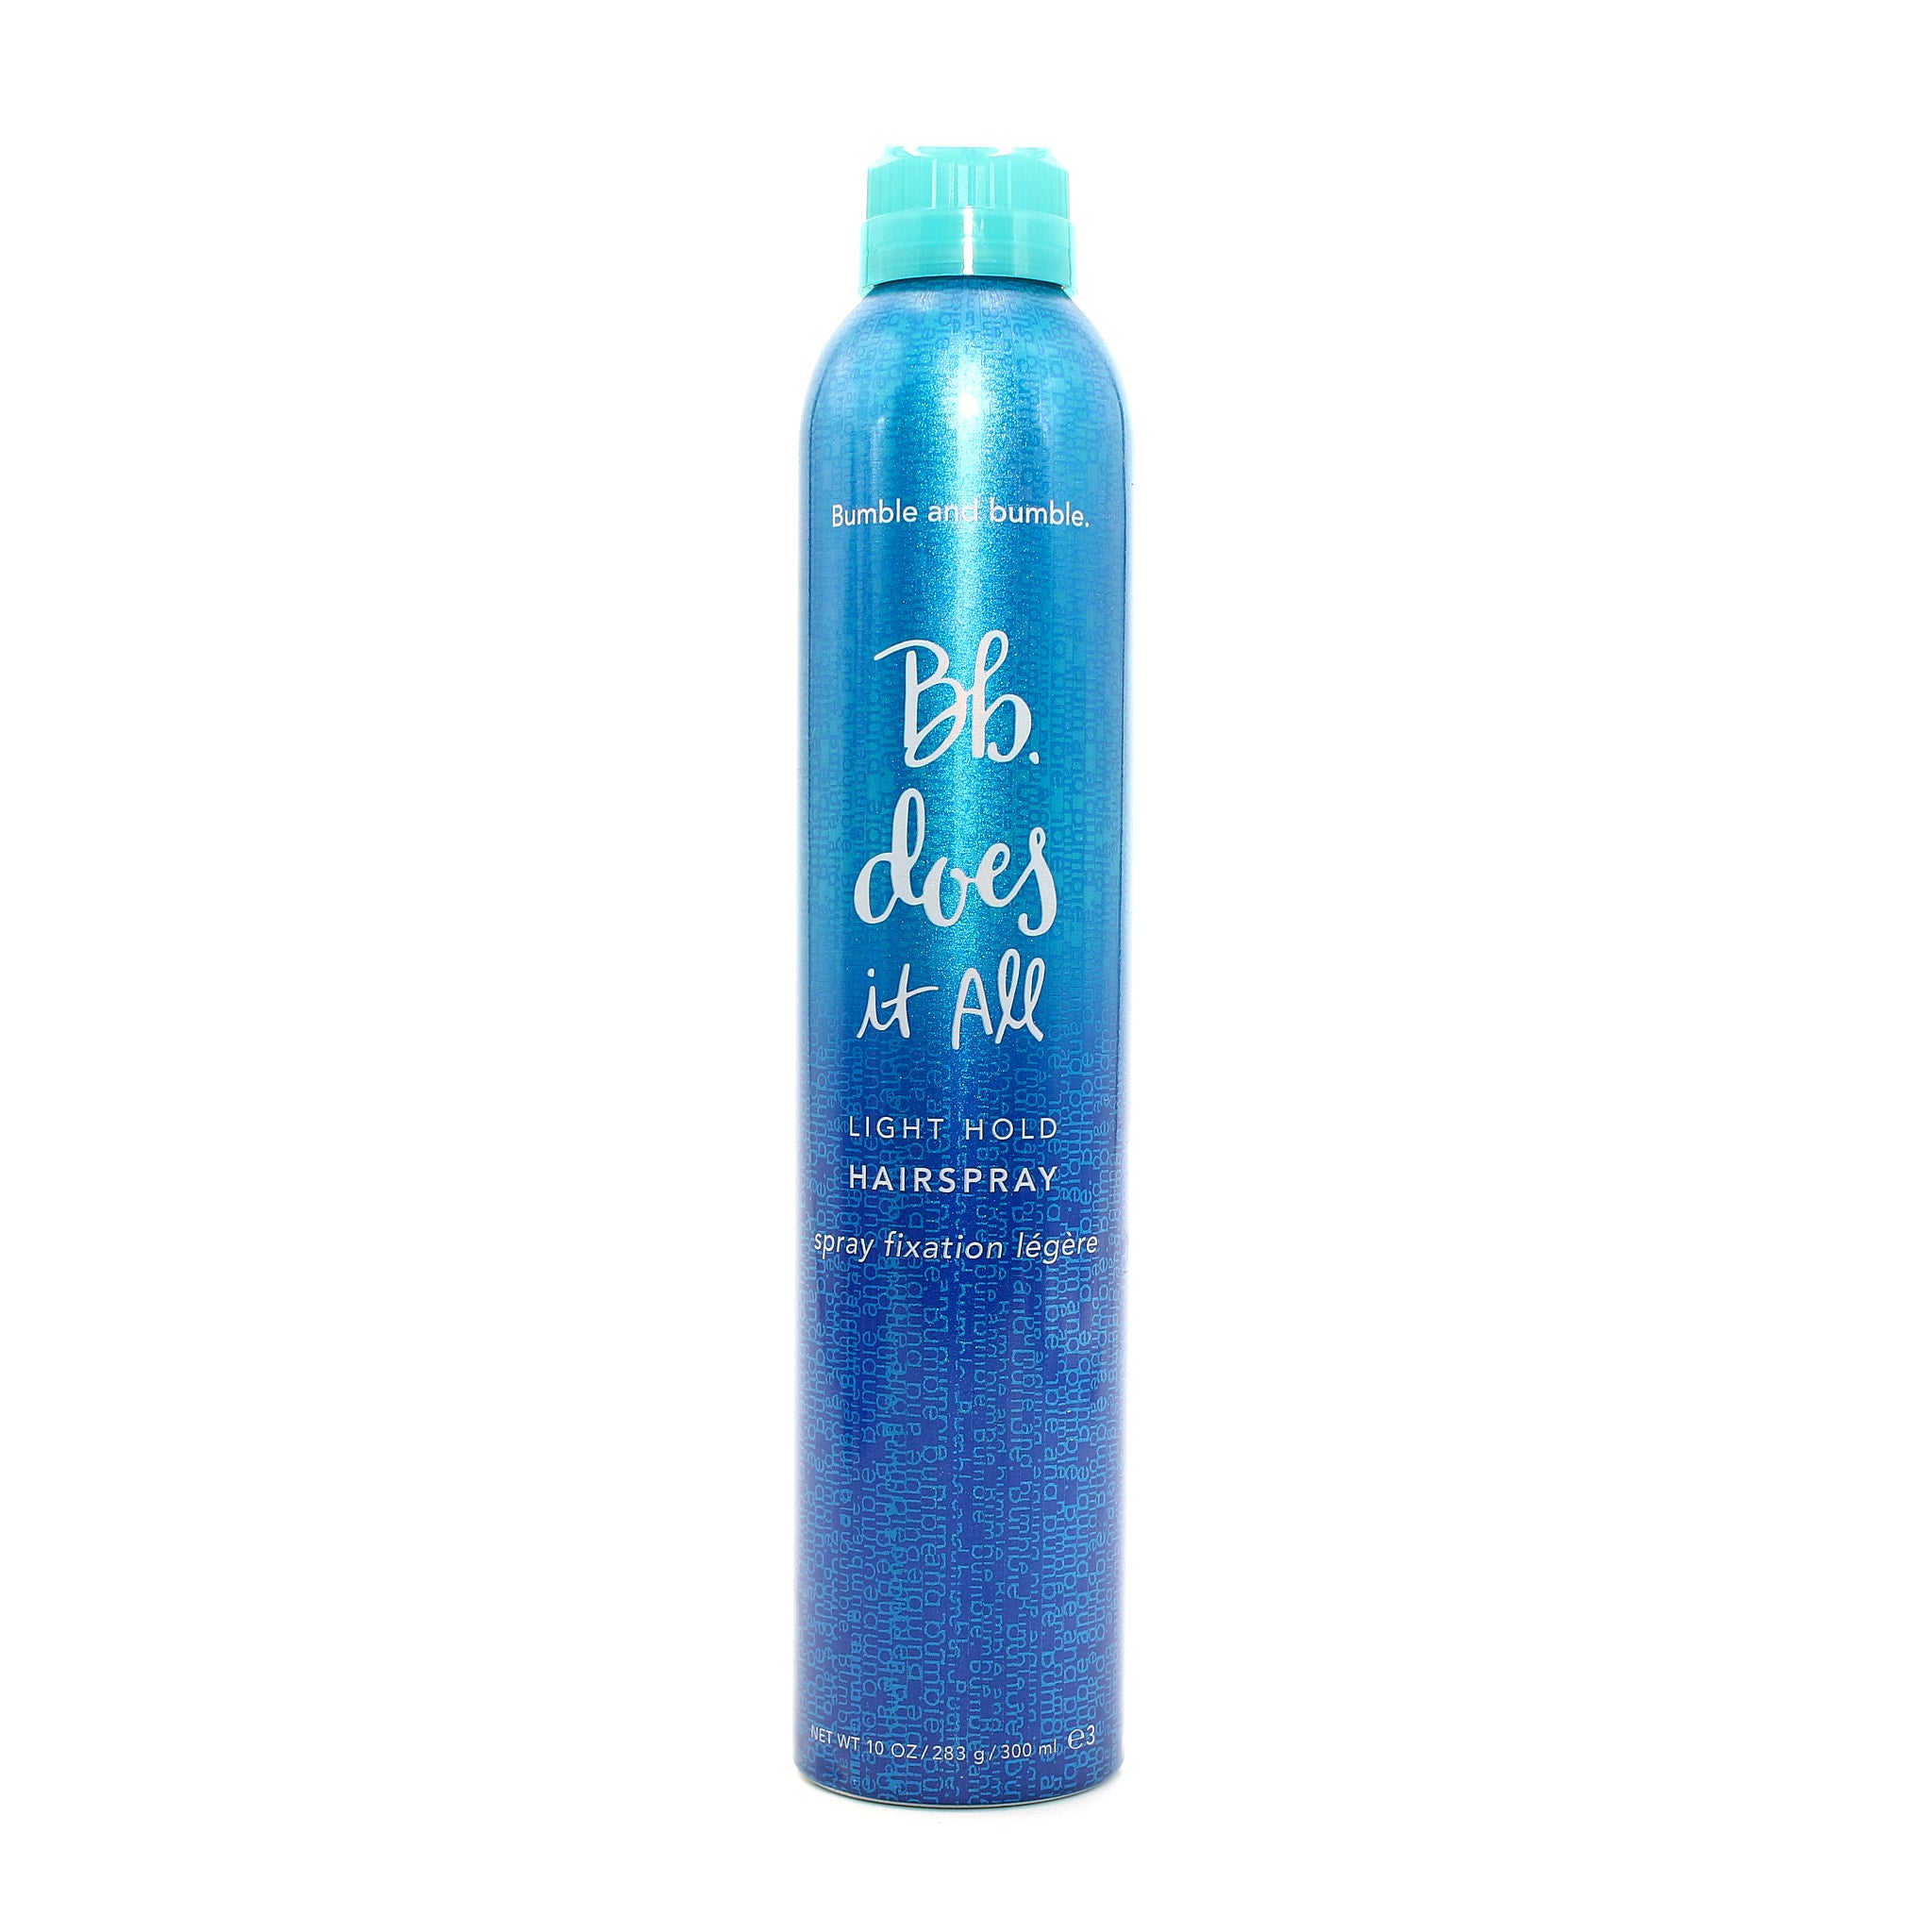 BUMBLE & BUMBLE Bb Does It All Light Hold Hairspray 10 oz